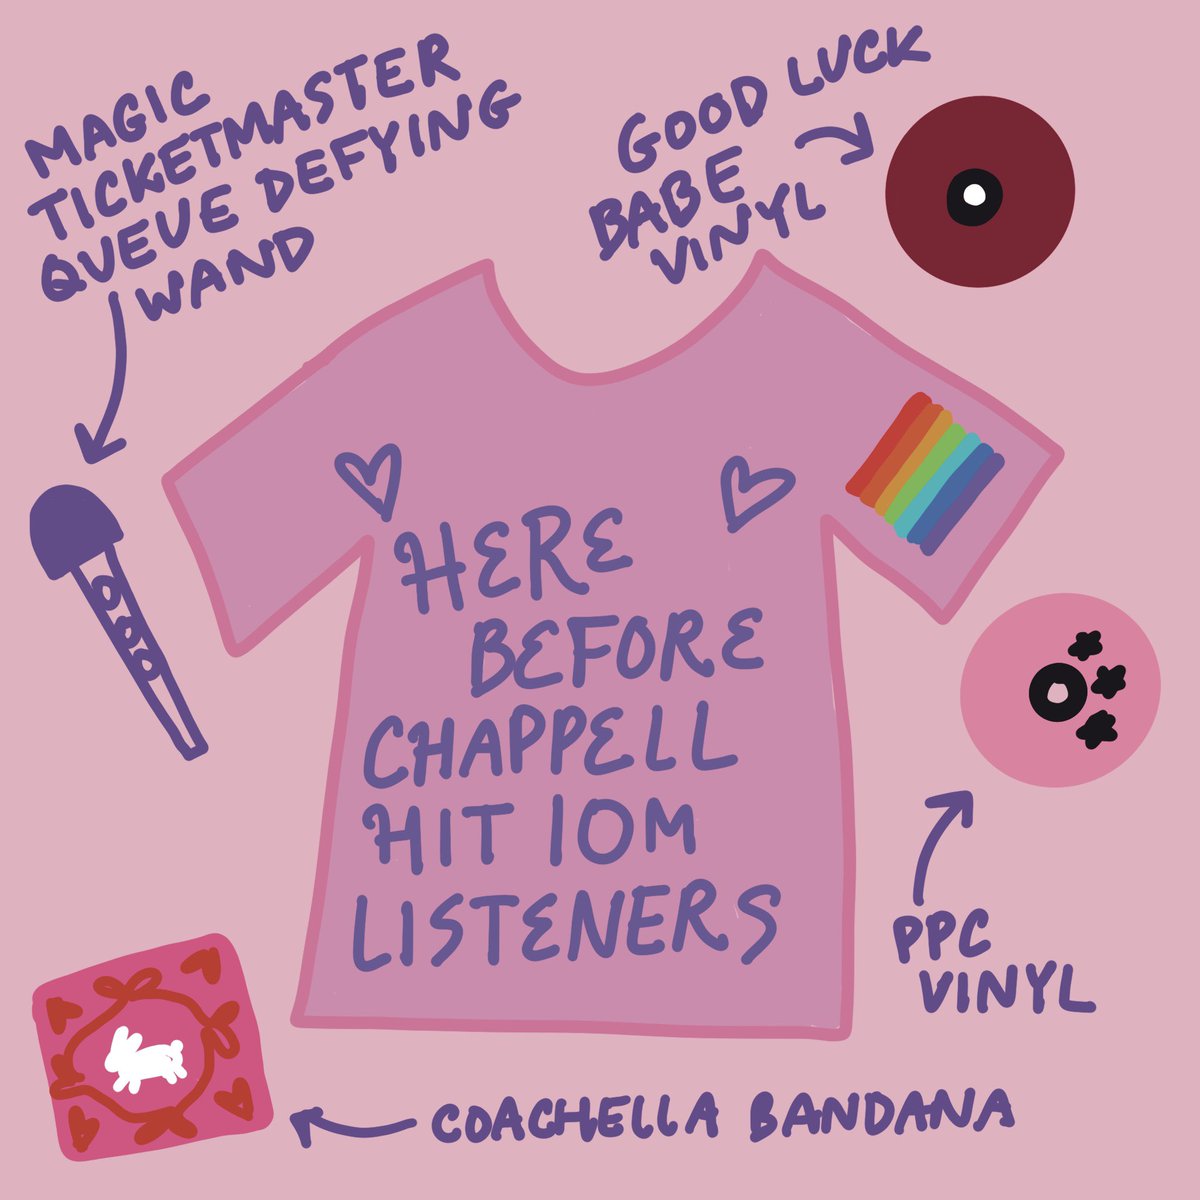 Attention Chappell twt! Chappell is set to hit 10m+ Spotify listeners at 3pm EST TOMORROW! Retweet to claim your merch before then! Because we all deserve it 😊💖✨